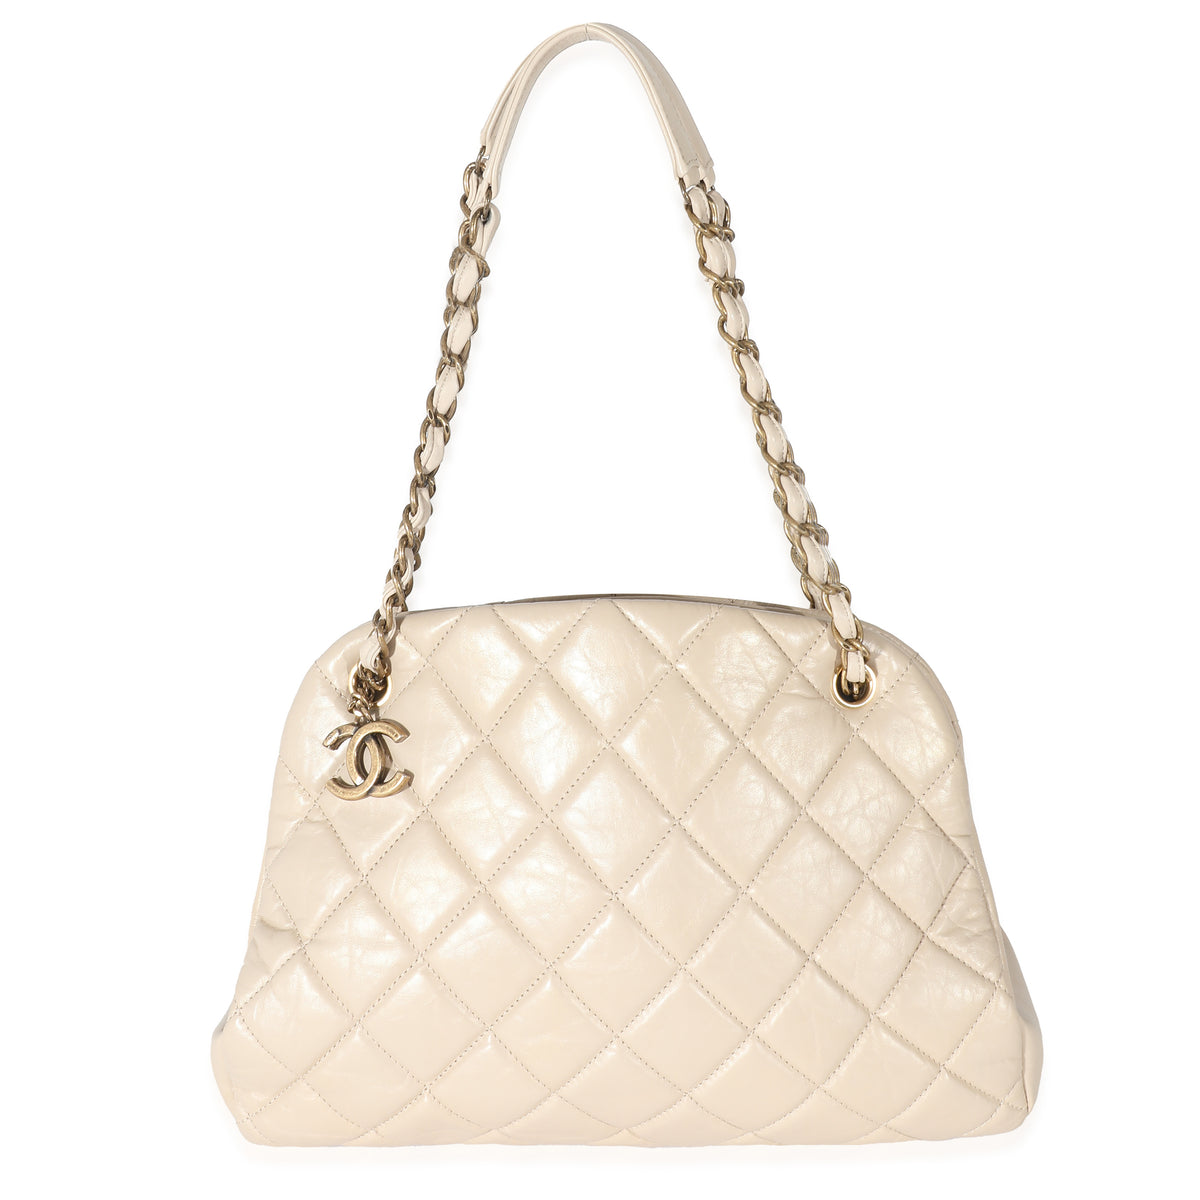 Chanel Beige Crinkled Leather Large Mademoiselle Just Bowling Bag